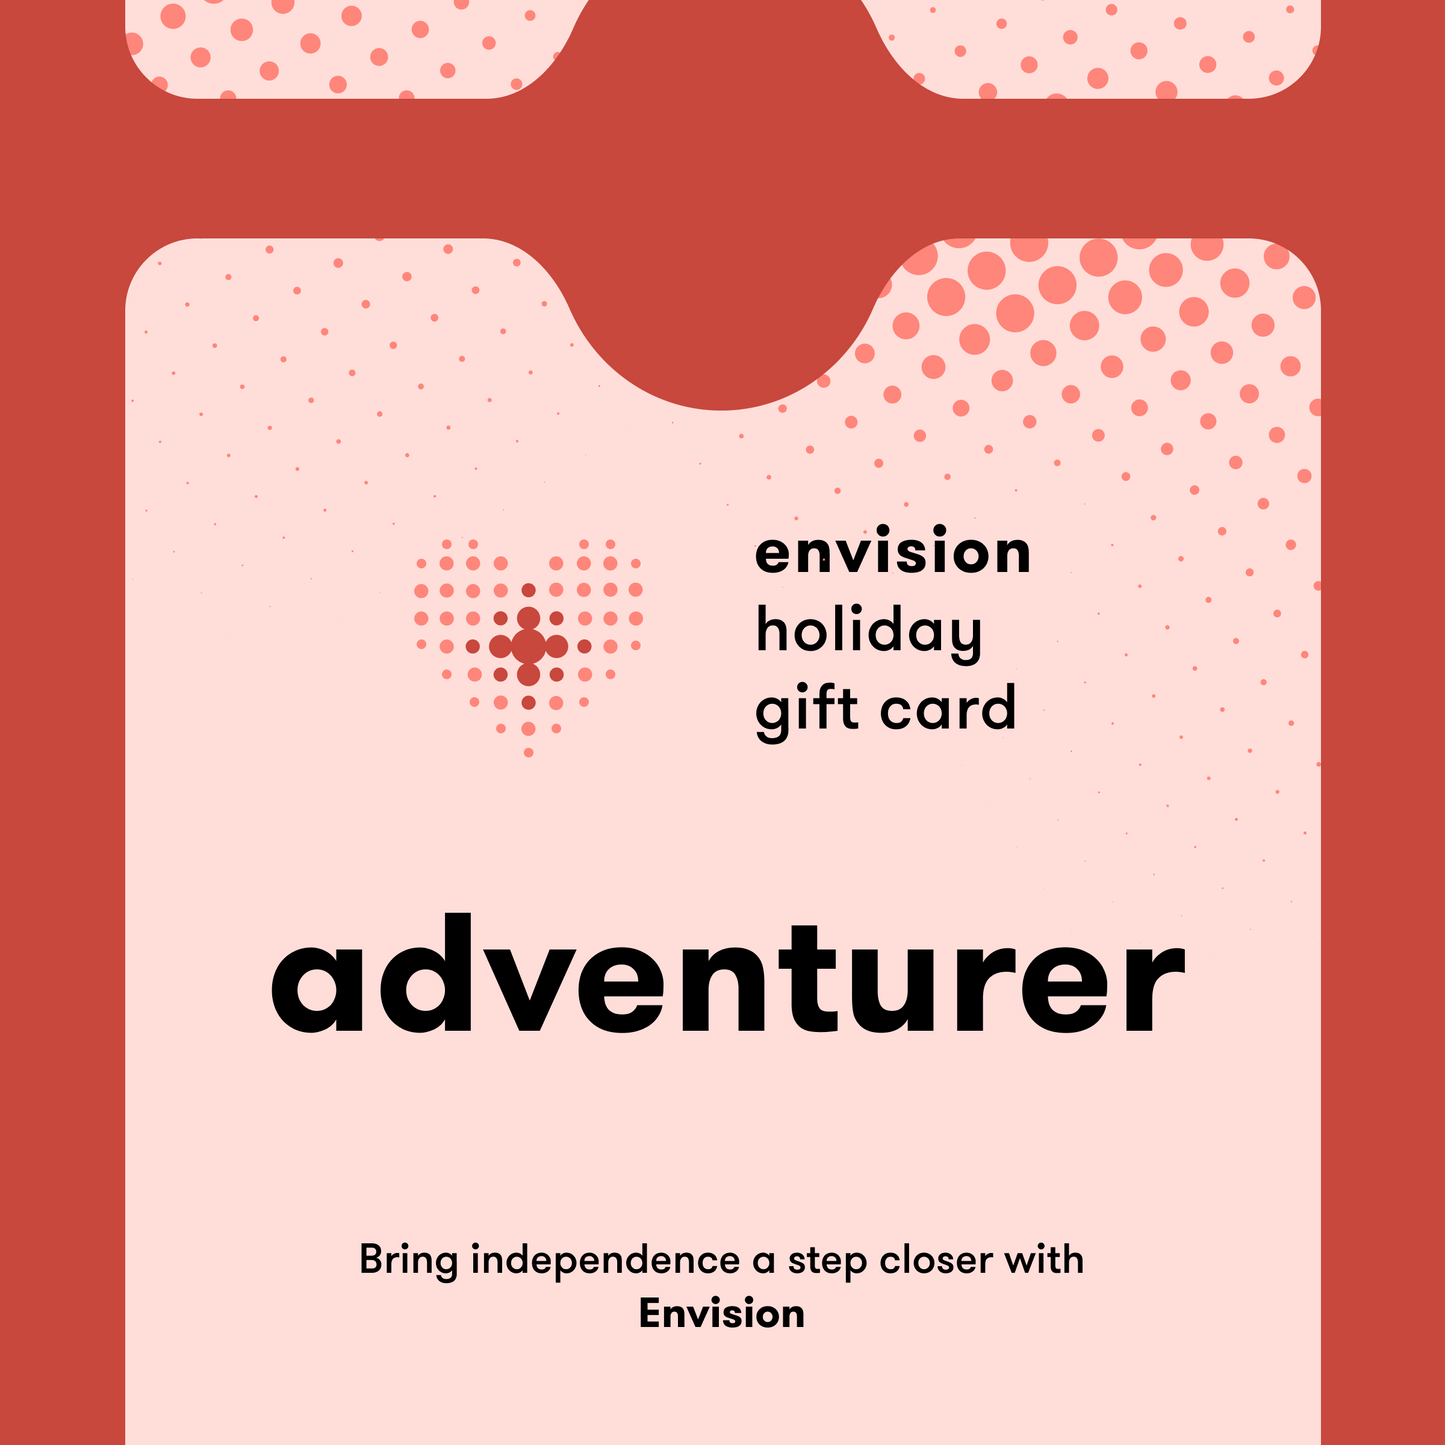 Illustration of a giftcard with the text stating: envision holiday gift card, adventurer, bring independence a step closer with Envision.